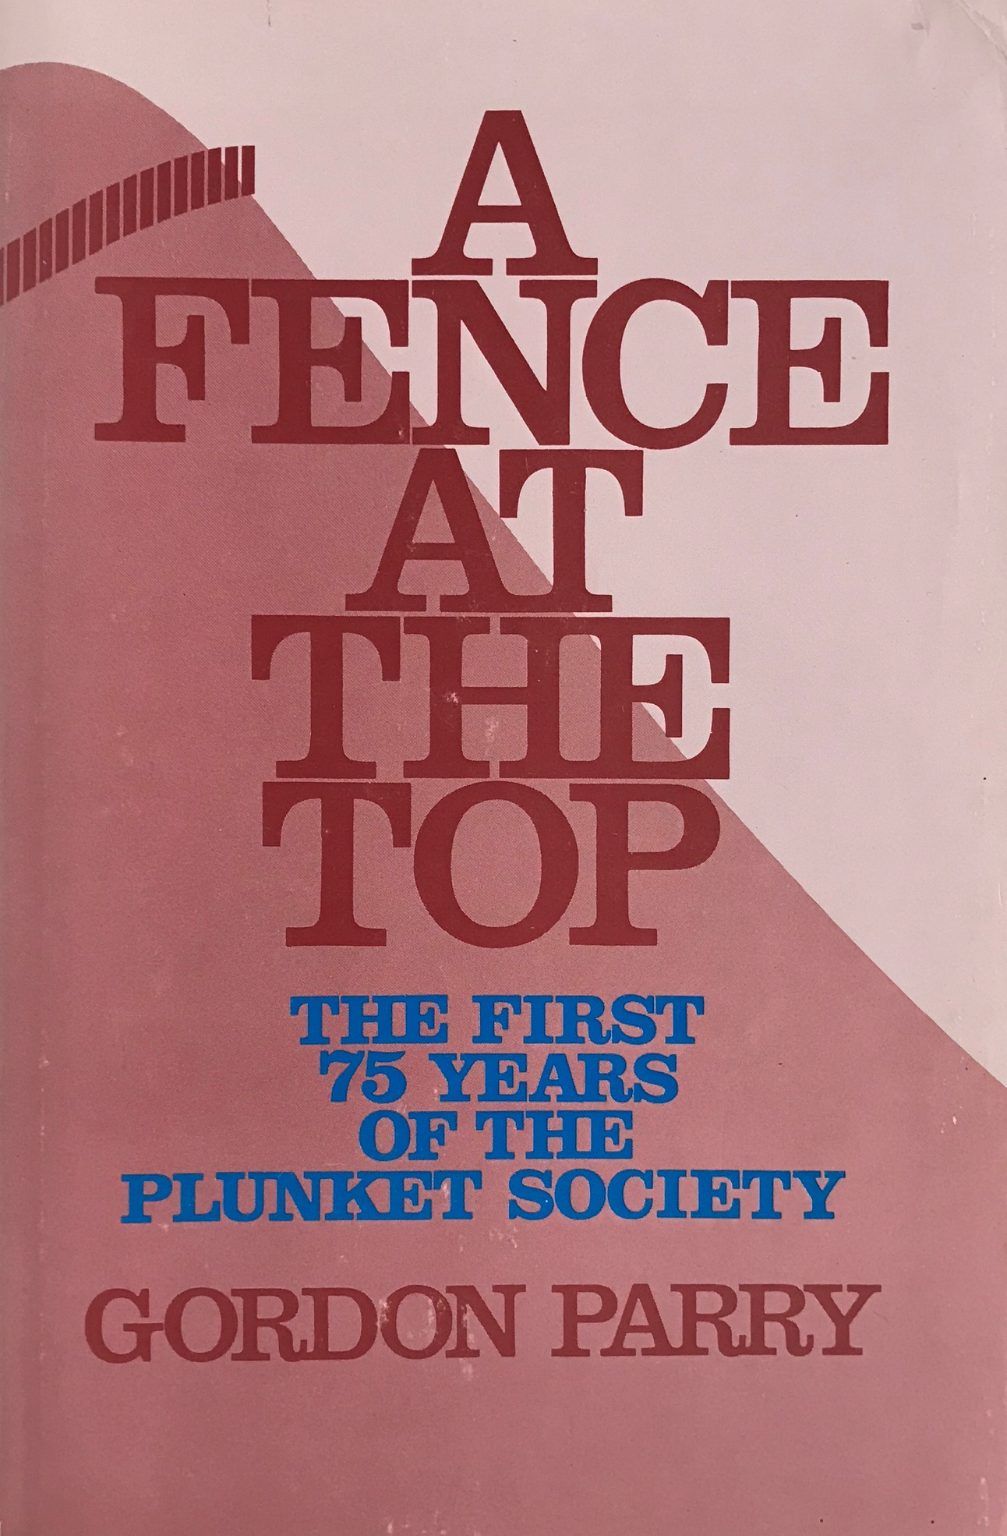 A FENCE AT THE TOP: The First 75 Years of The Plunket Society